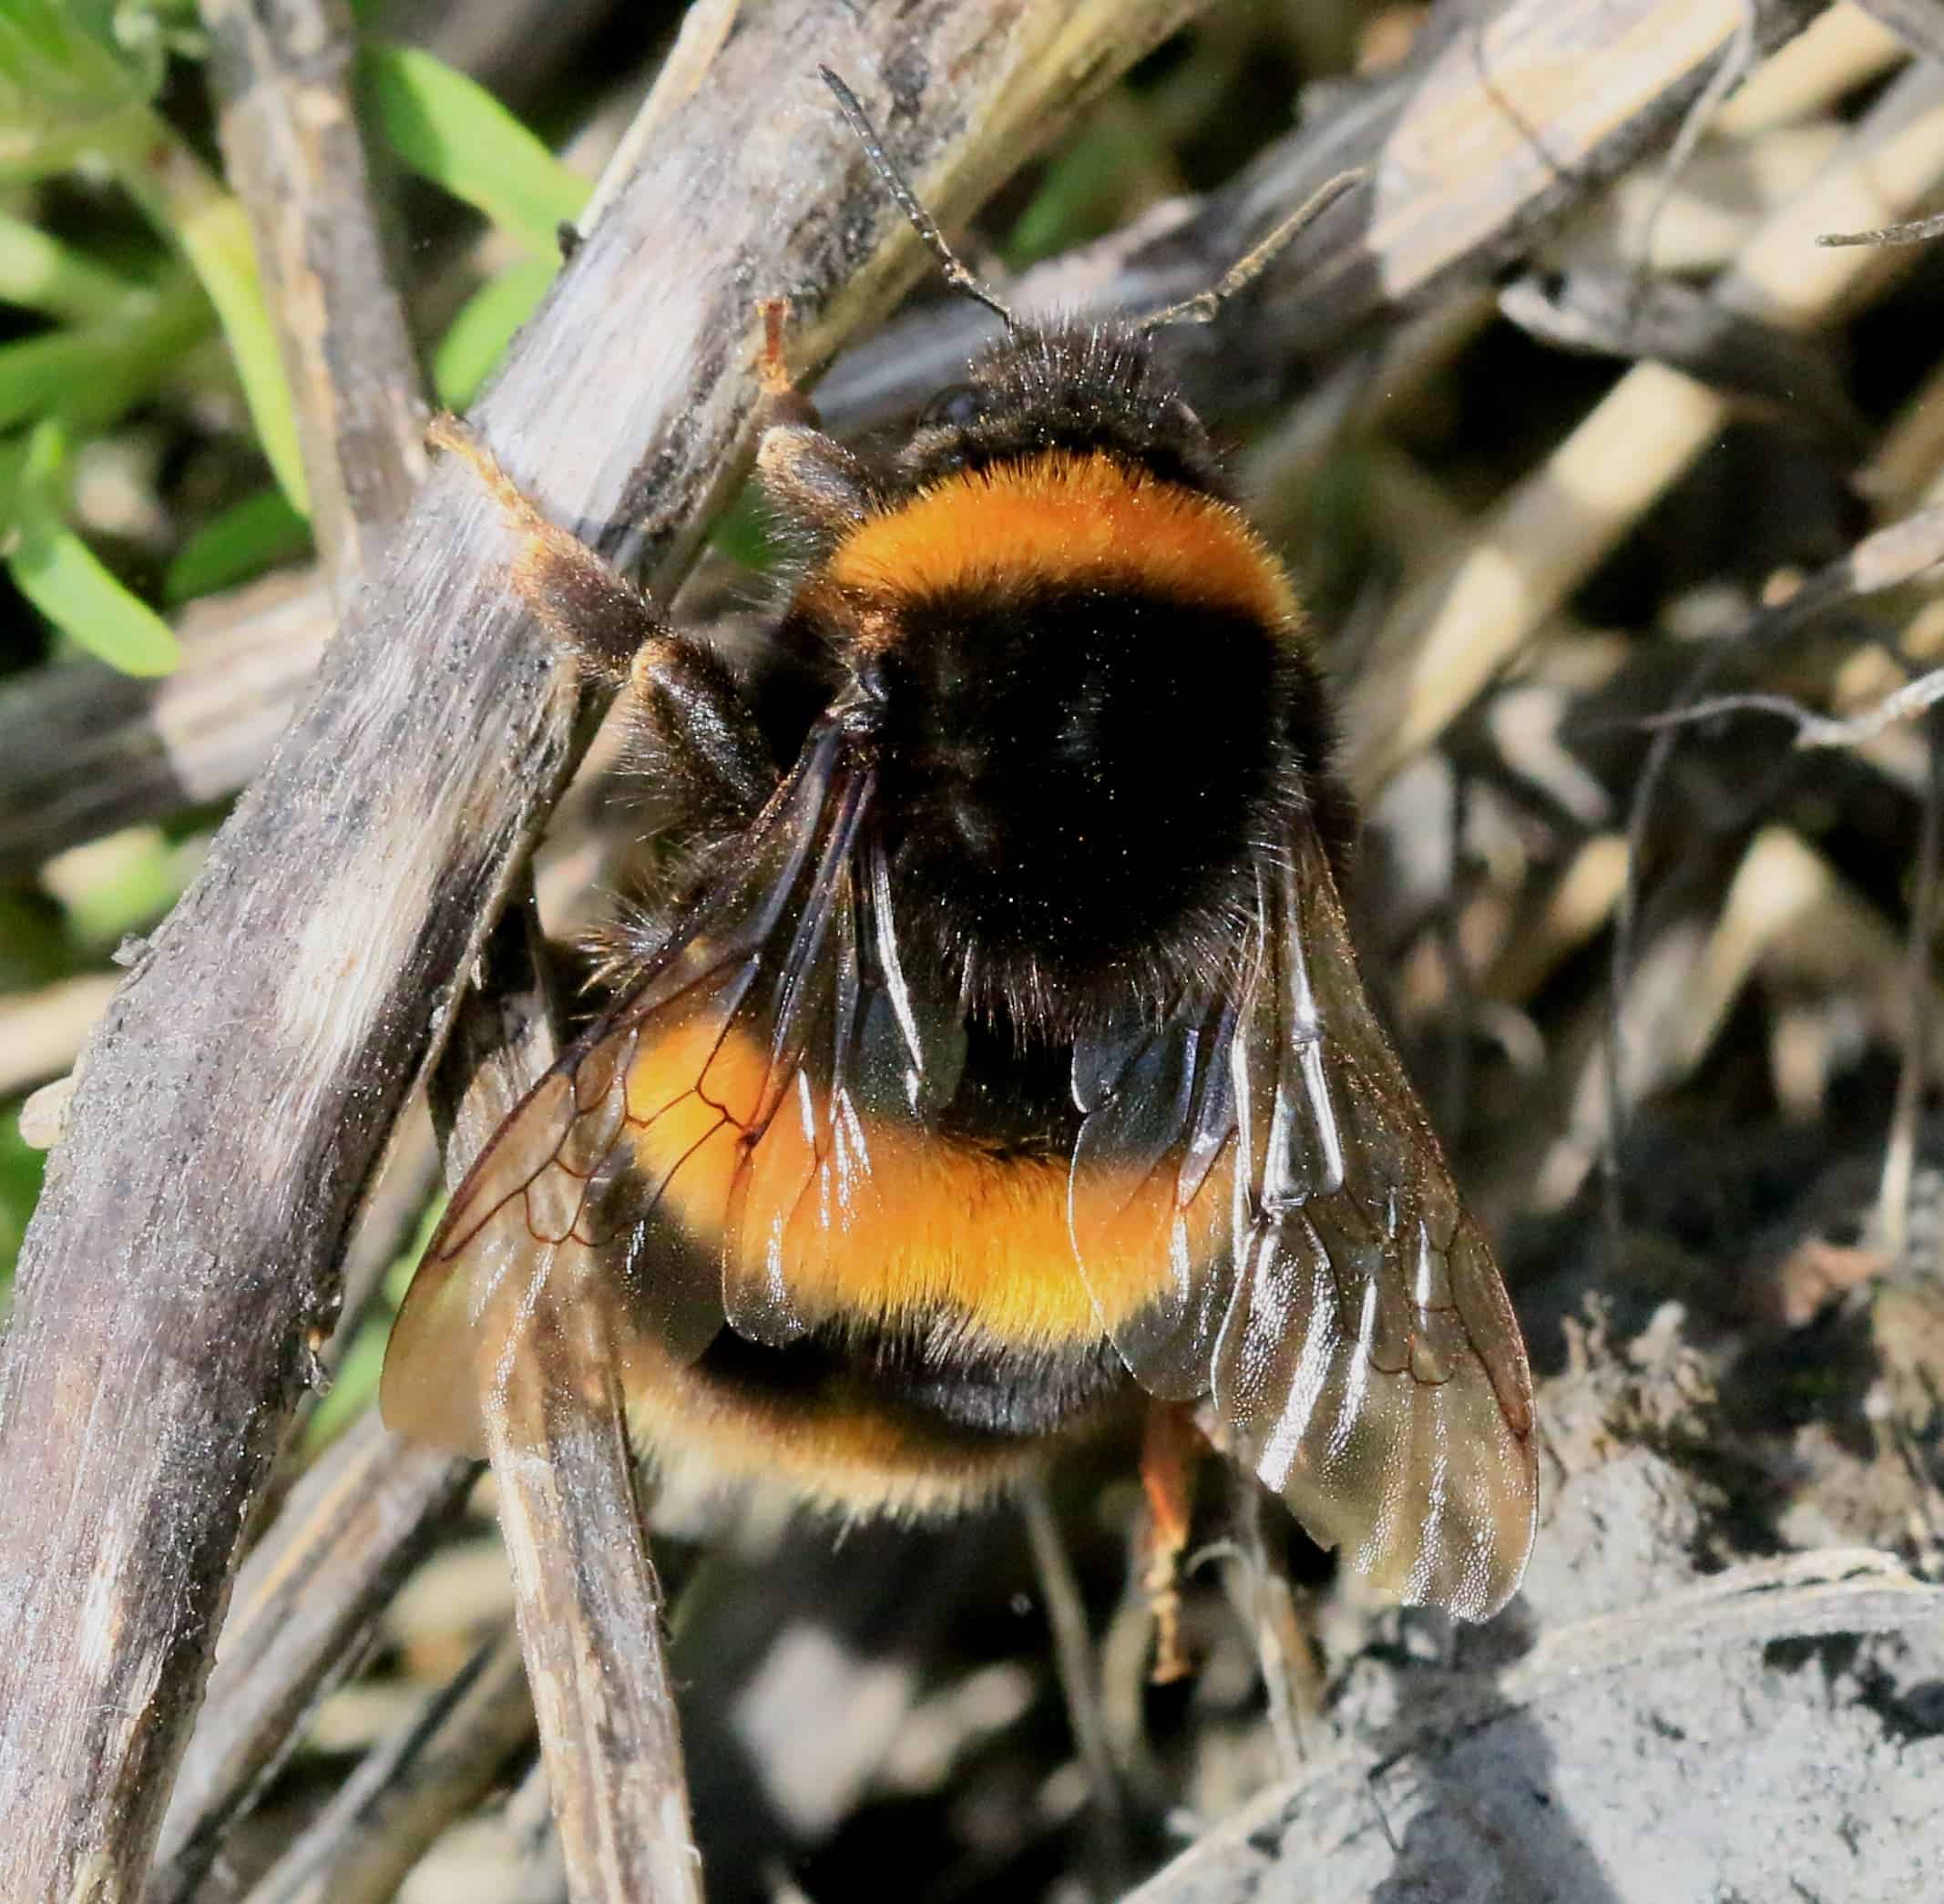 Bumblebee queens spend a lot of time resting on the ground, researchers say. Image via Wiki Commons.